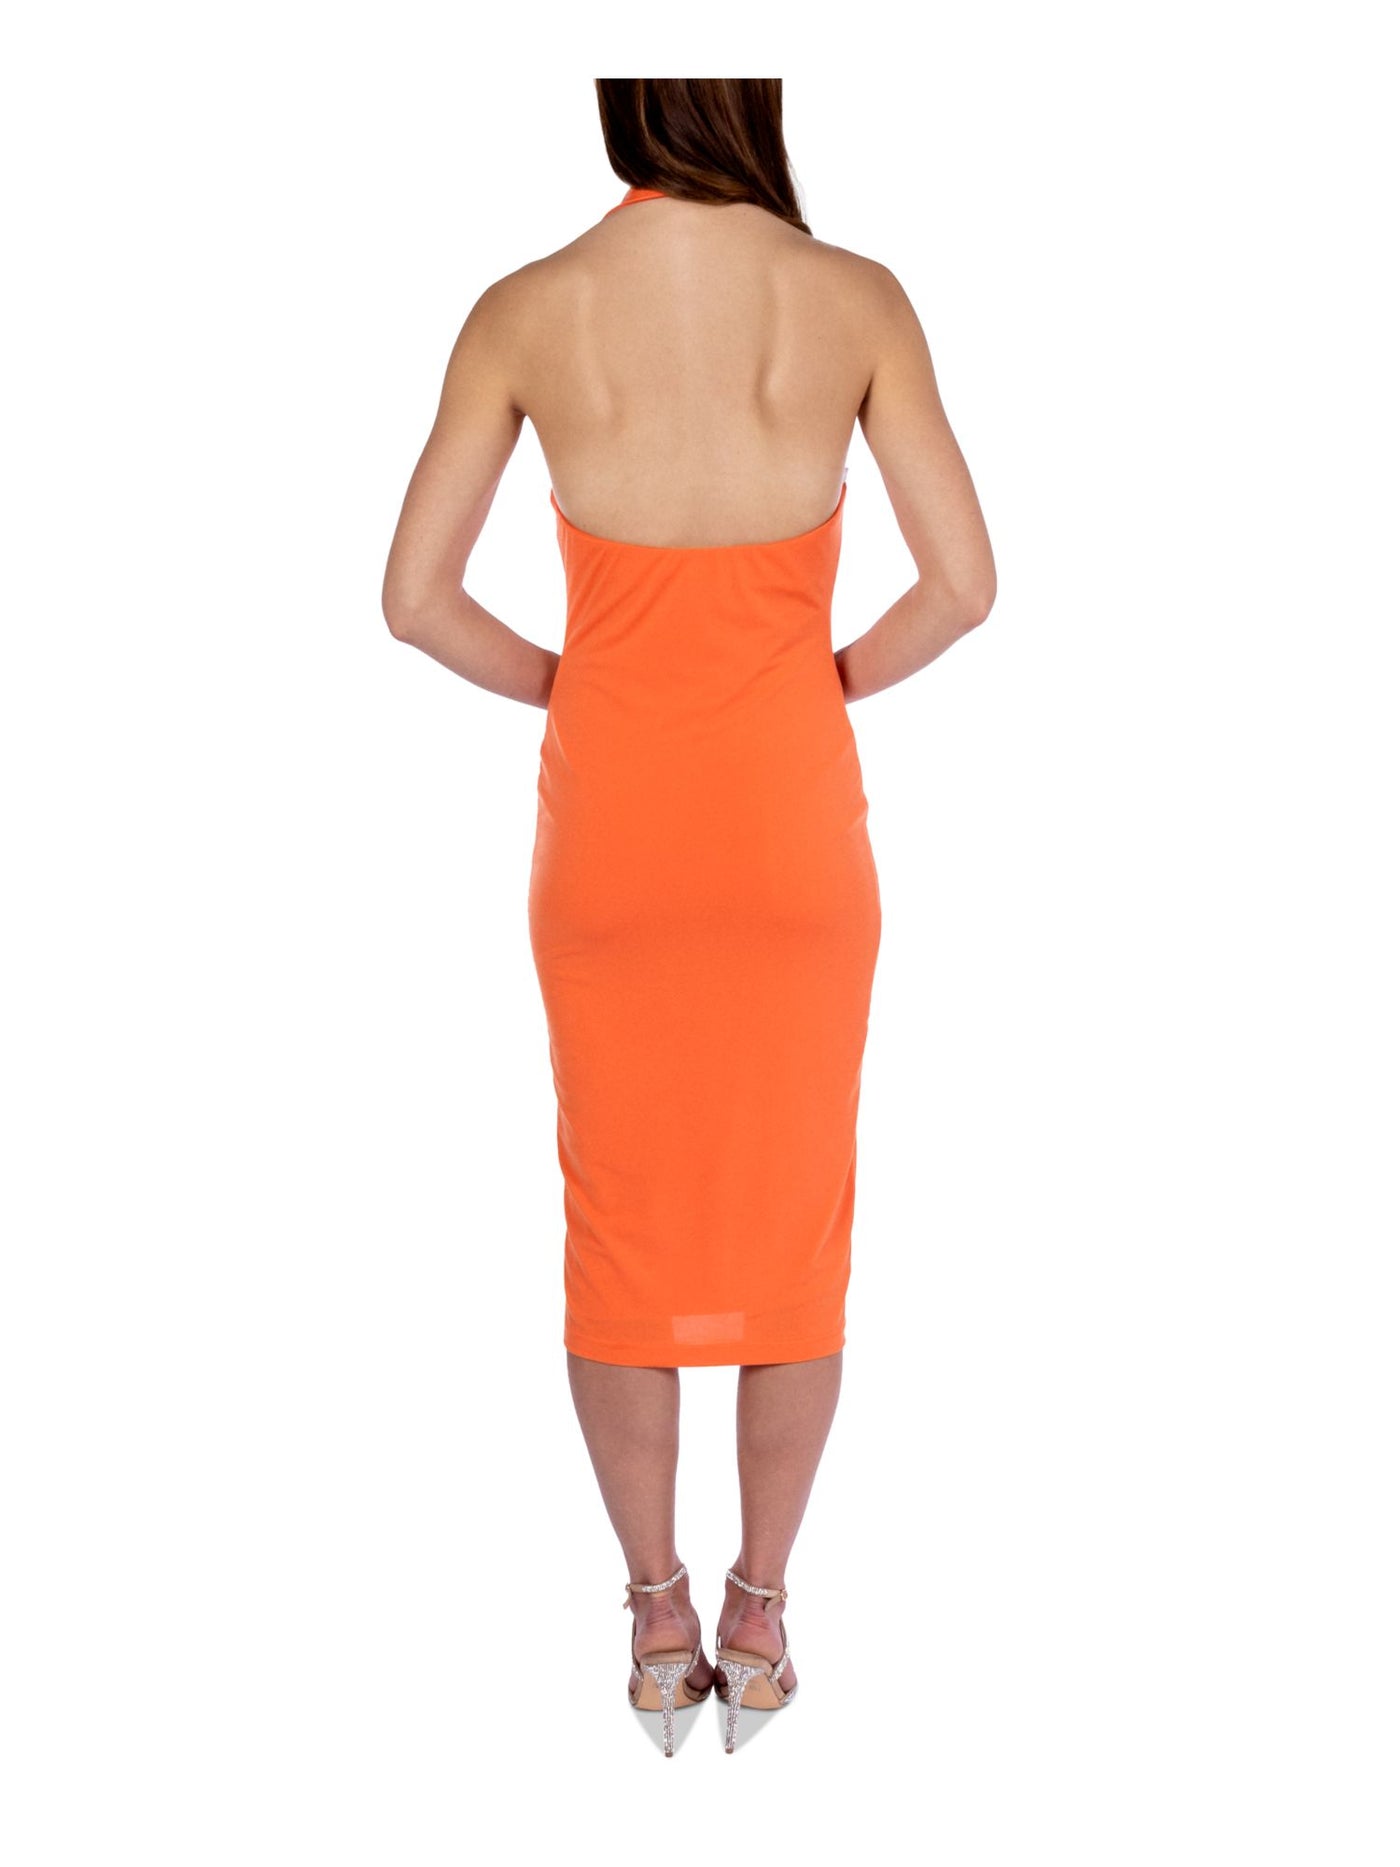 B DARLIN Womens Orange Cut Out Pullover Collared Lined Sleeveless Halter Midi Party Body Con Dress Juniors M